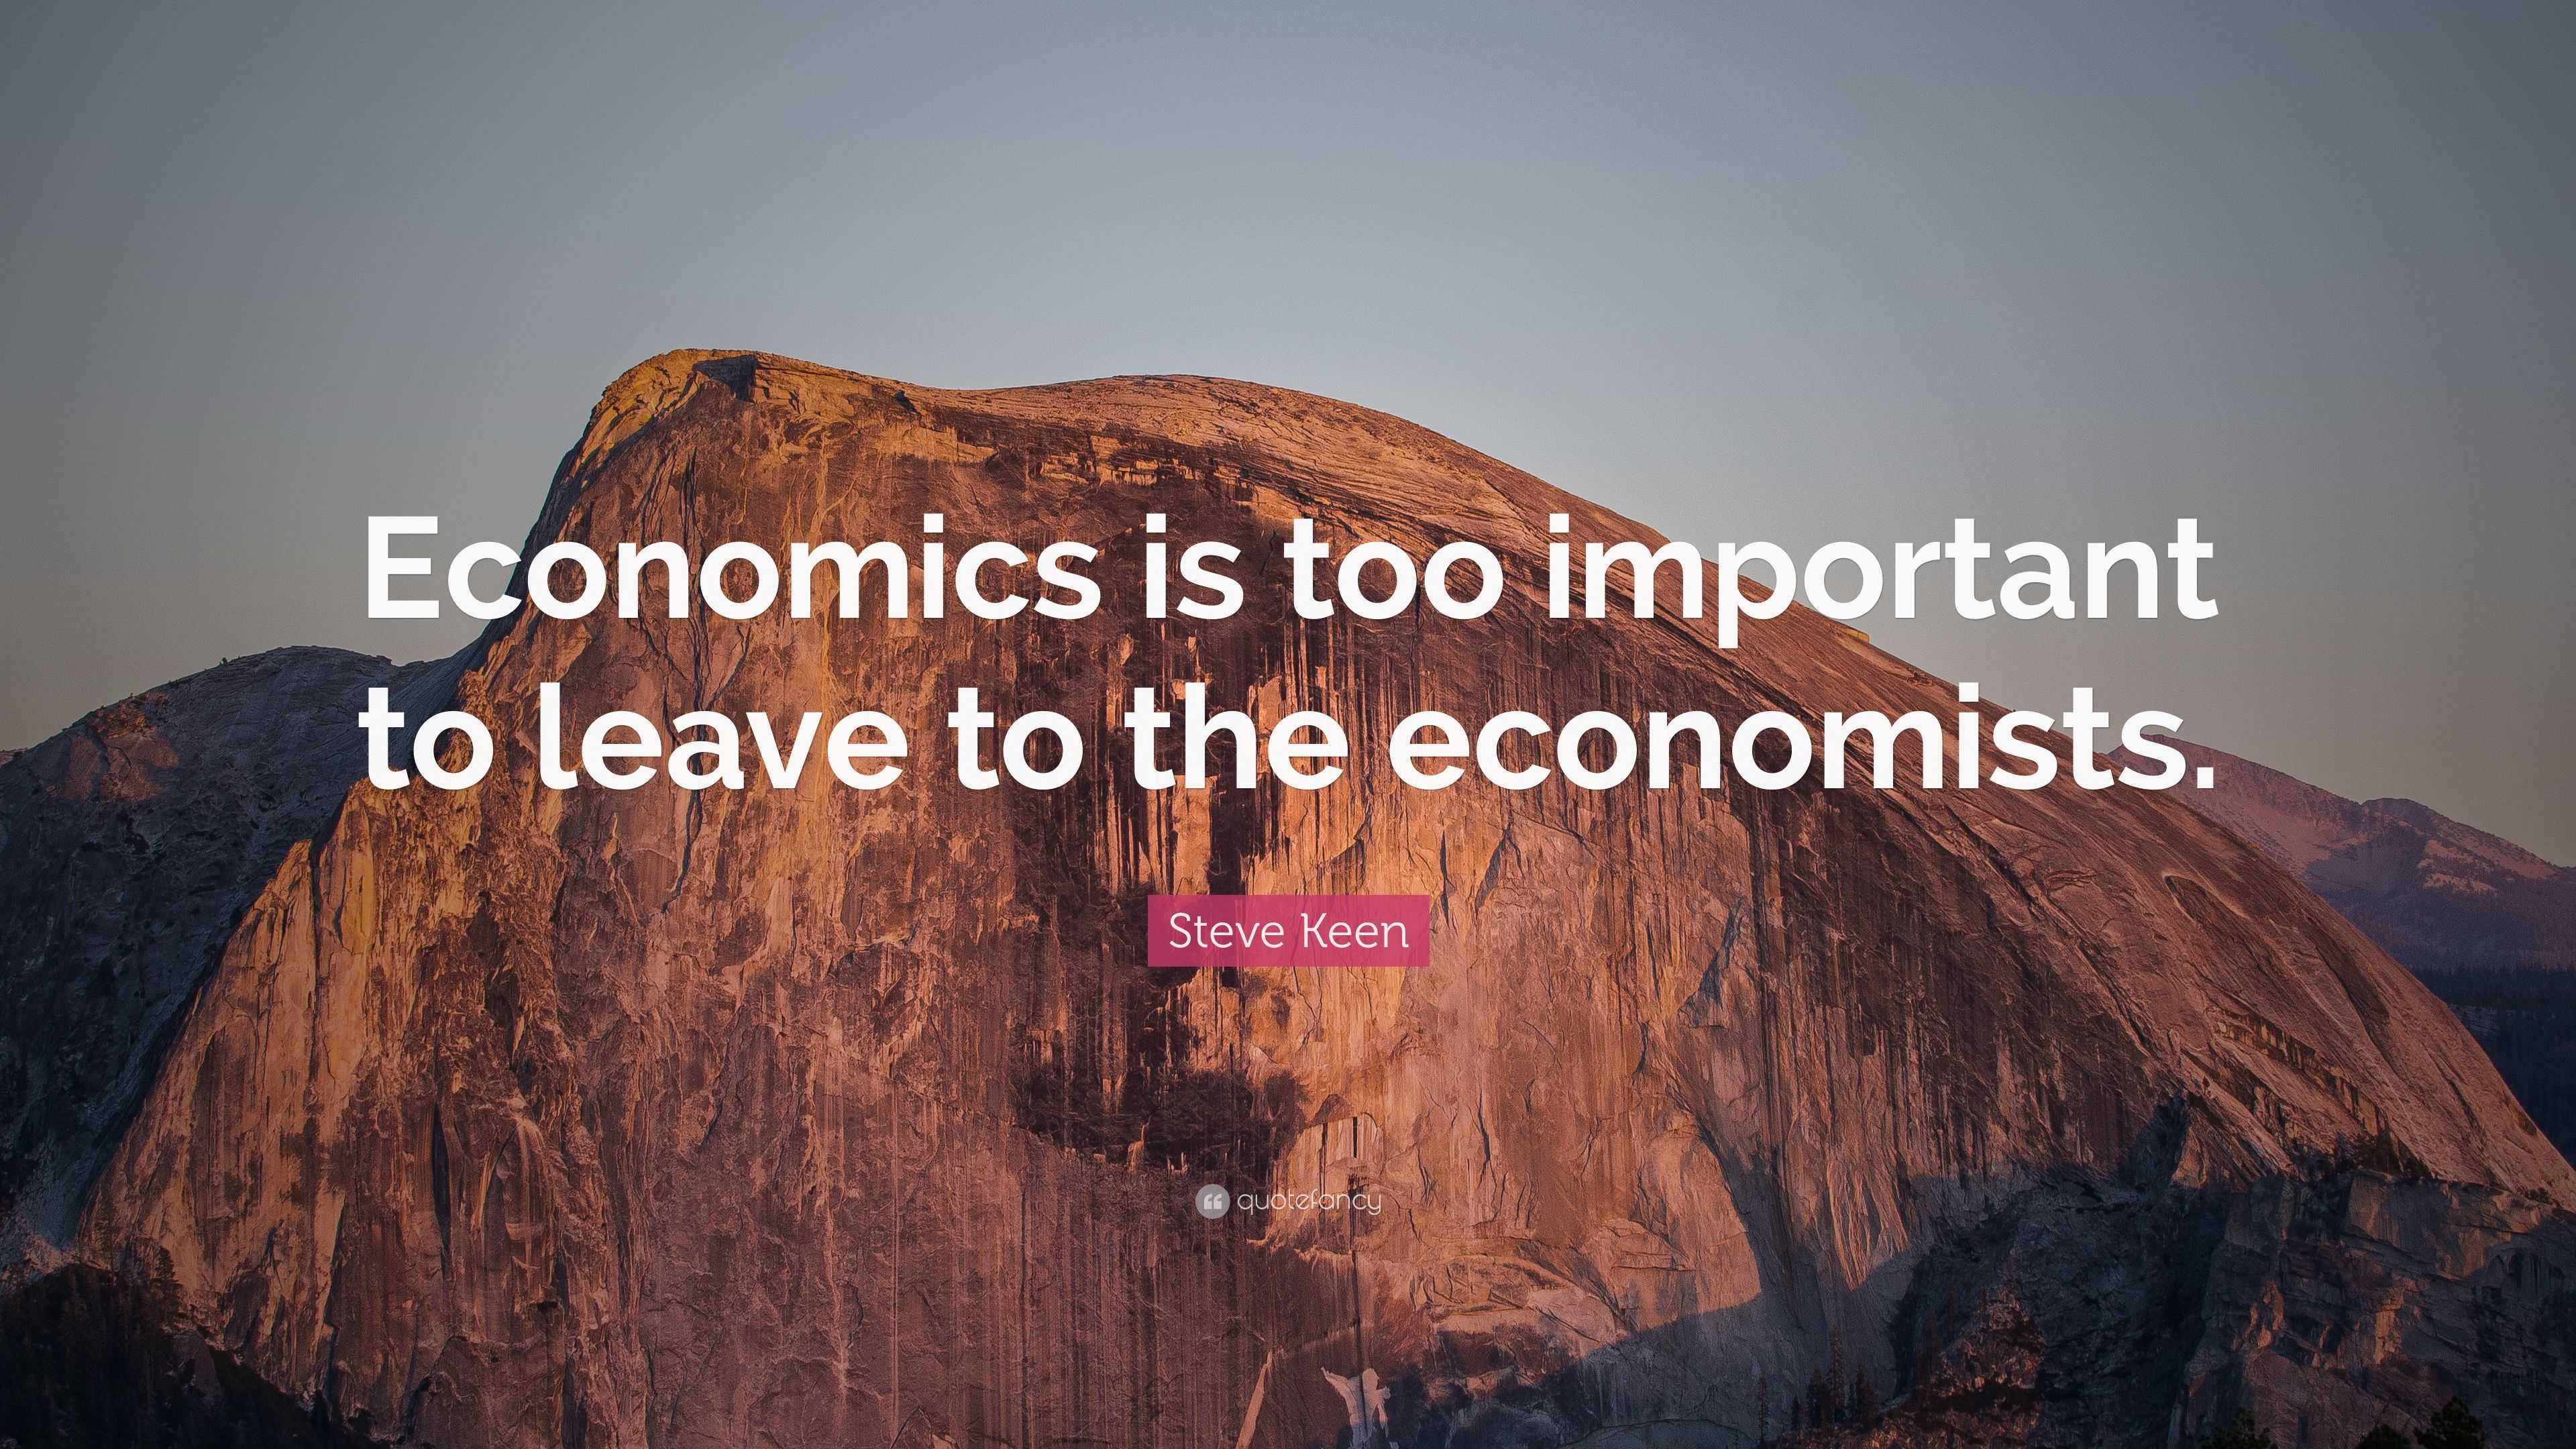 Steve Keen Quote: “Economics is too important to leave to the economists.”